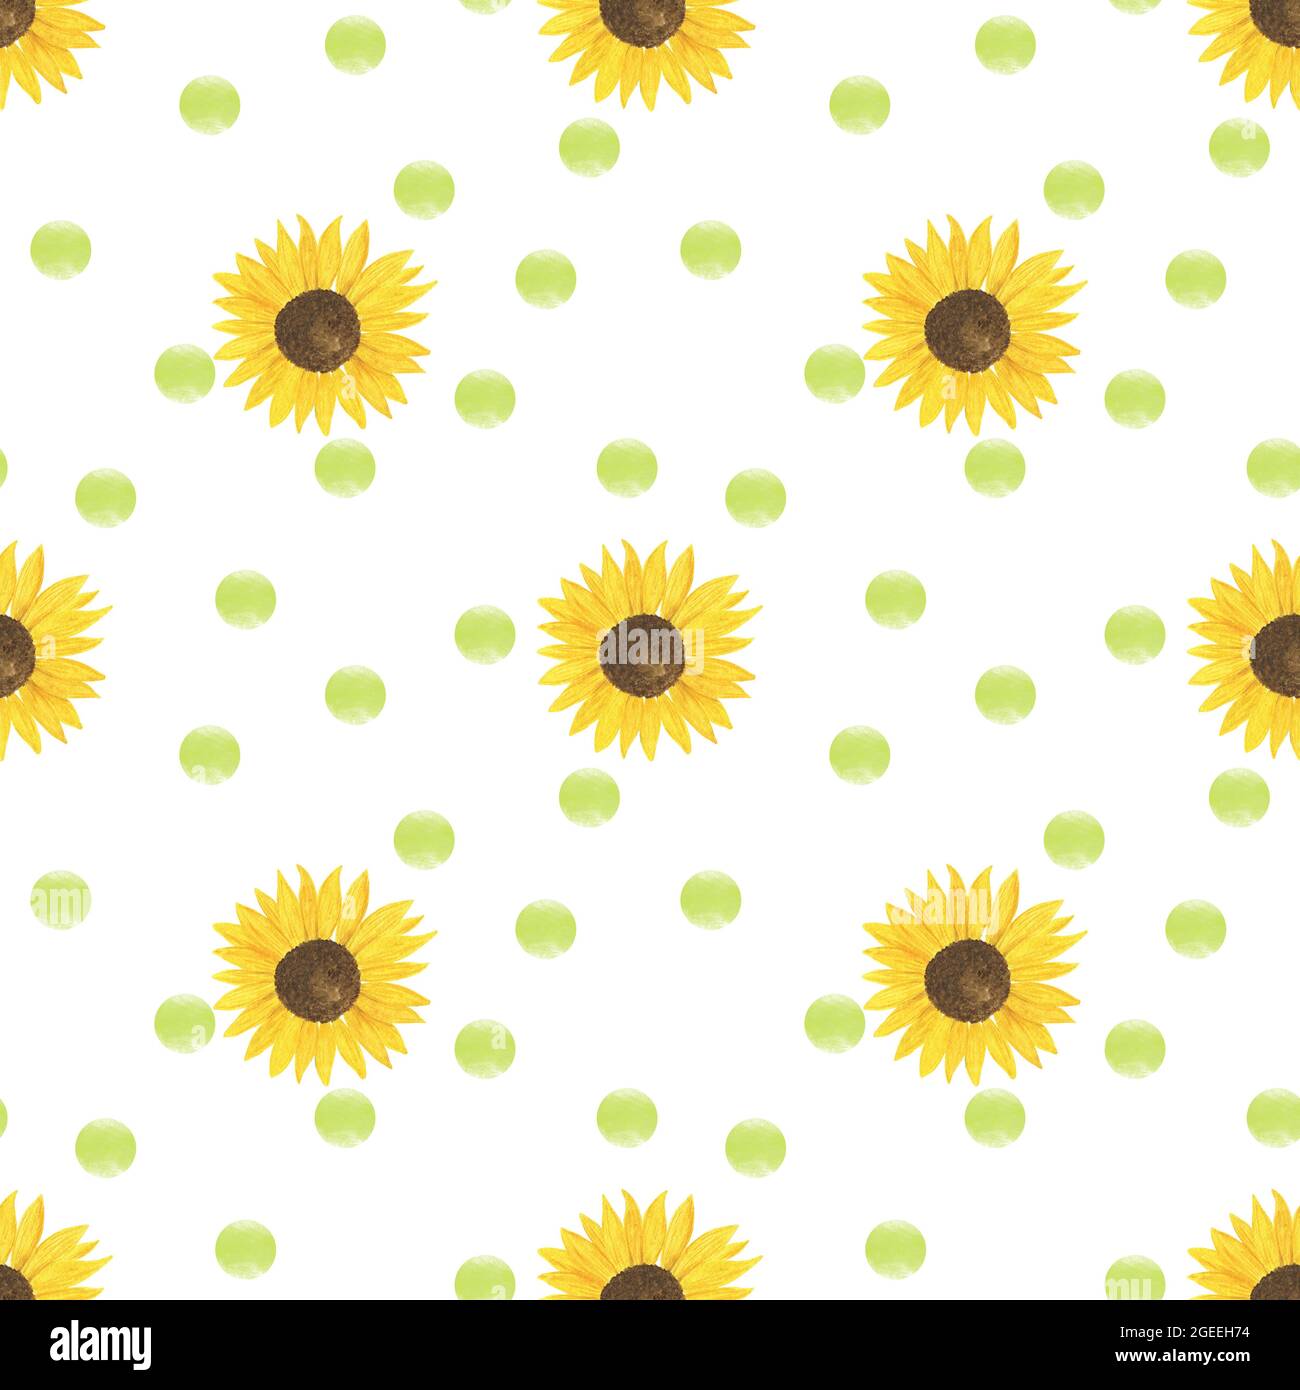 Yellow sunflowers floral diagonal ornament on light green polka dot abstract background seamless pattern, symbol of summer and harvest time period for Stock Photo